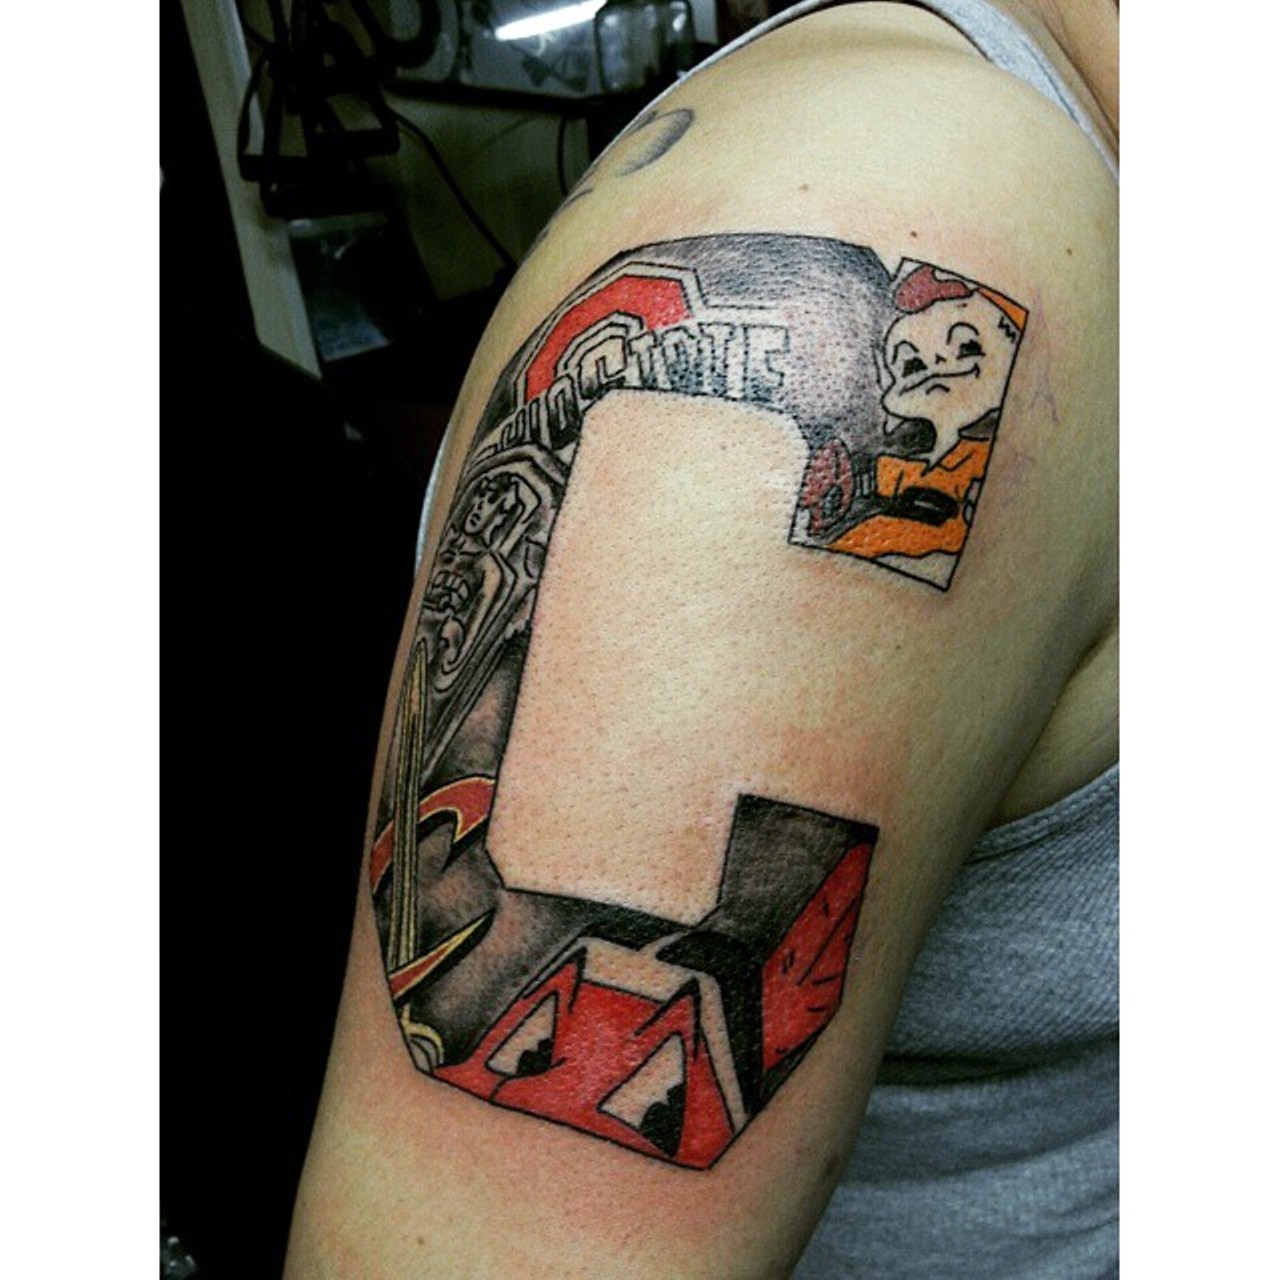 This large block C tattoo is perfect for the diehard Ohio sports fan. The colored tat features every major Cleveland sports team, a shout-out to the reigning national champions and a depiction of one of the Guardians of Traffic (Photo courtesy of Instagram user @inked_familia).